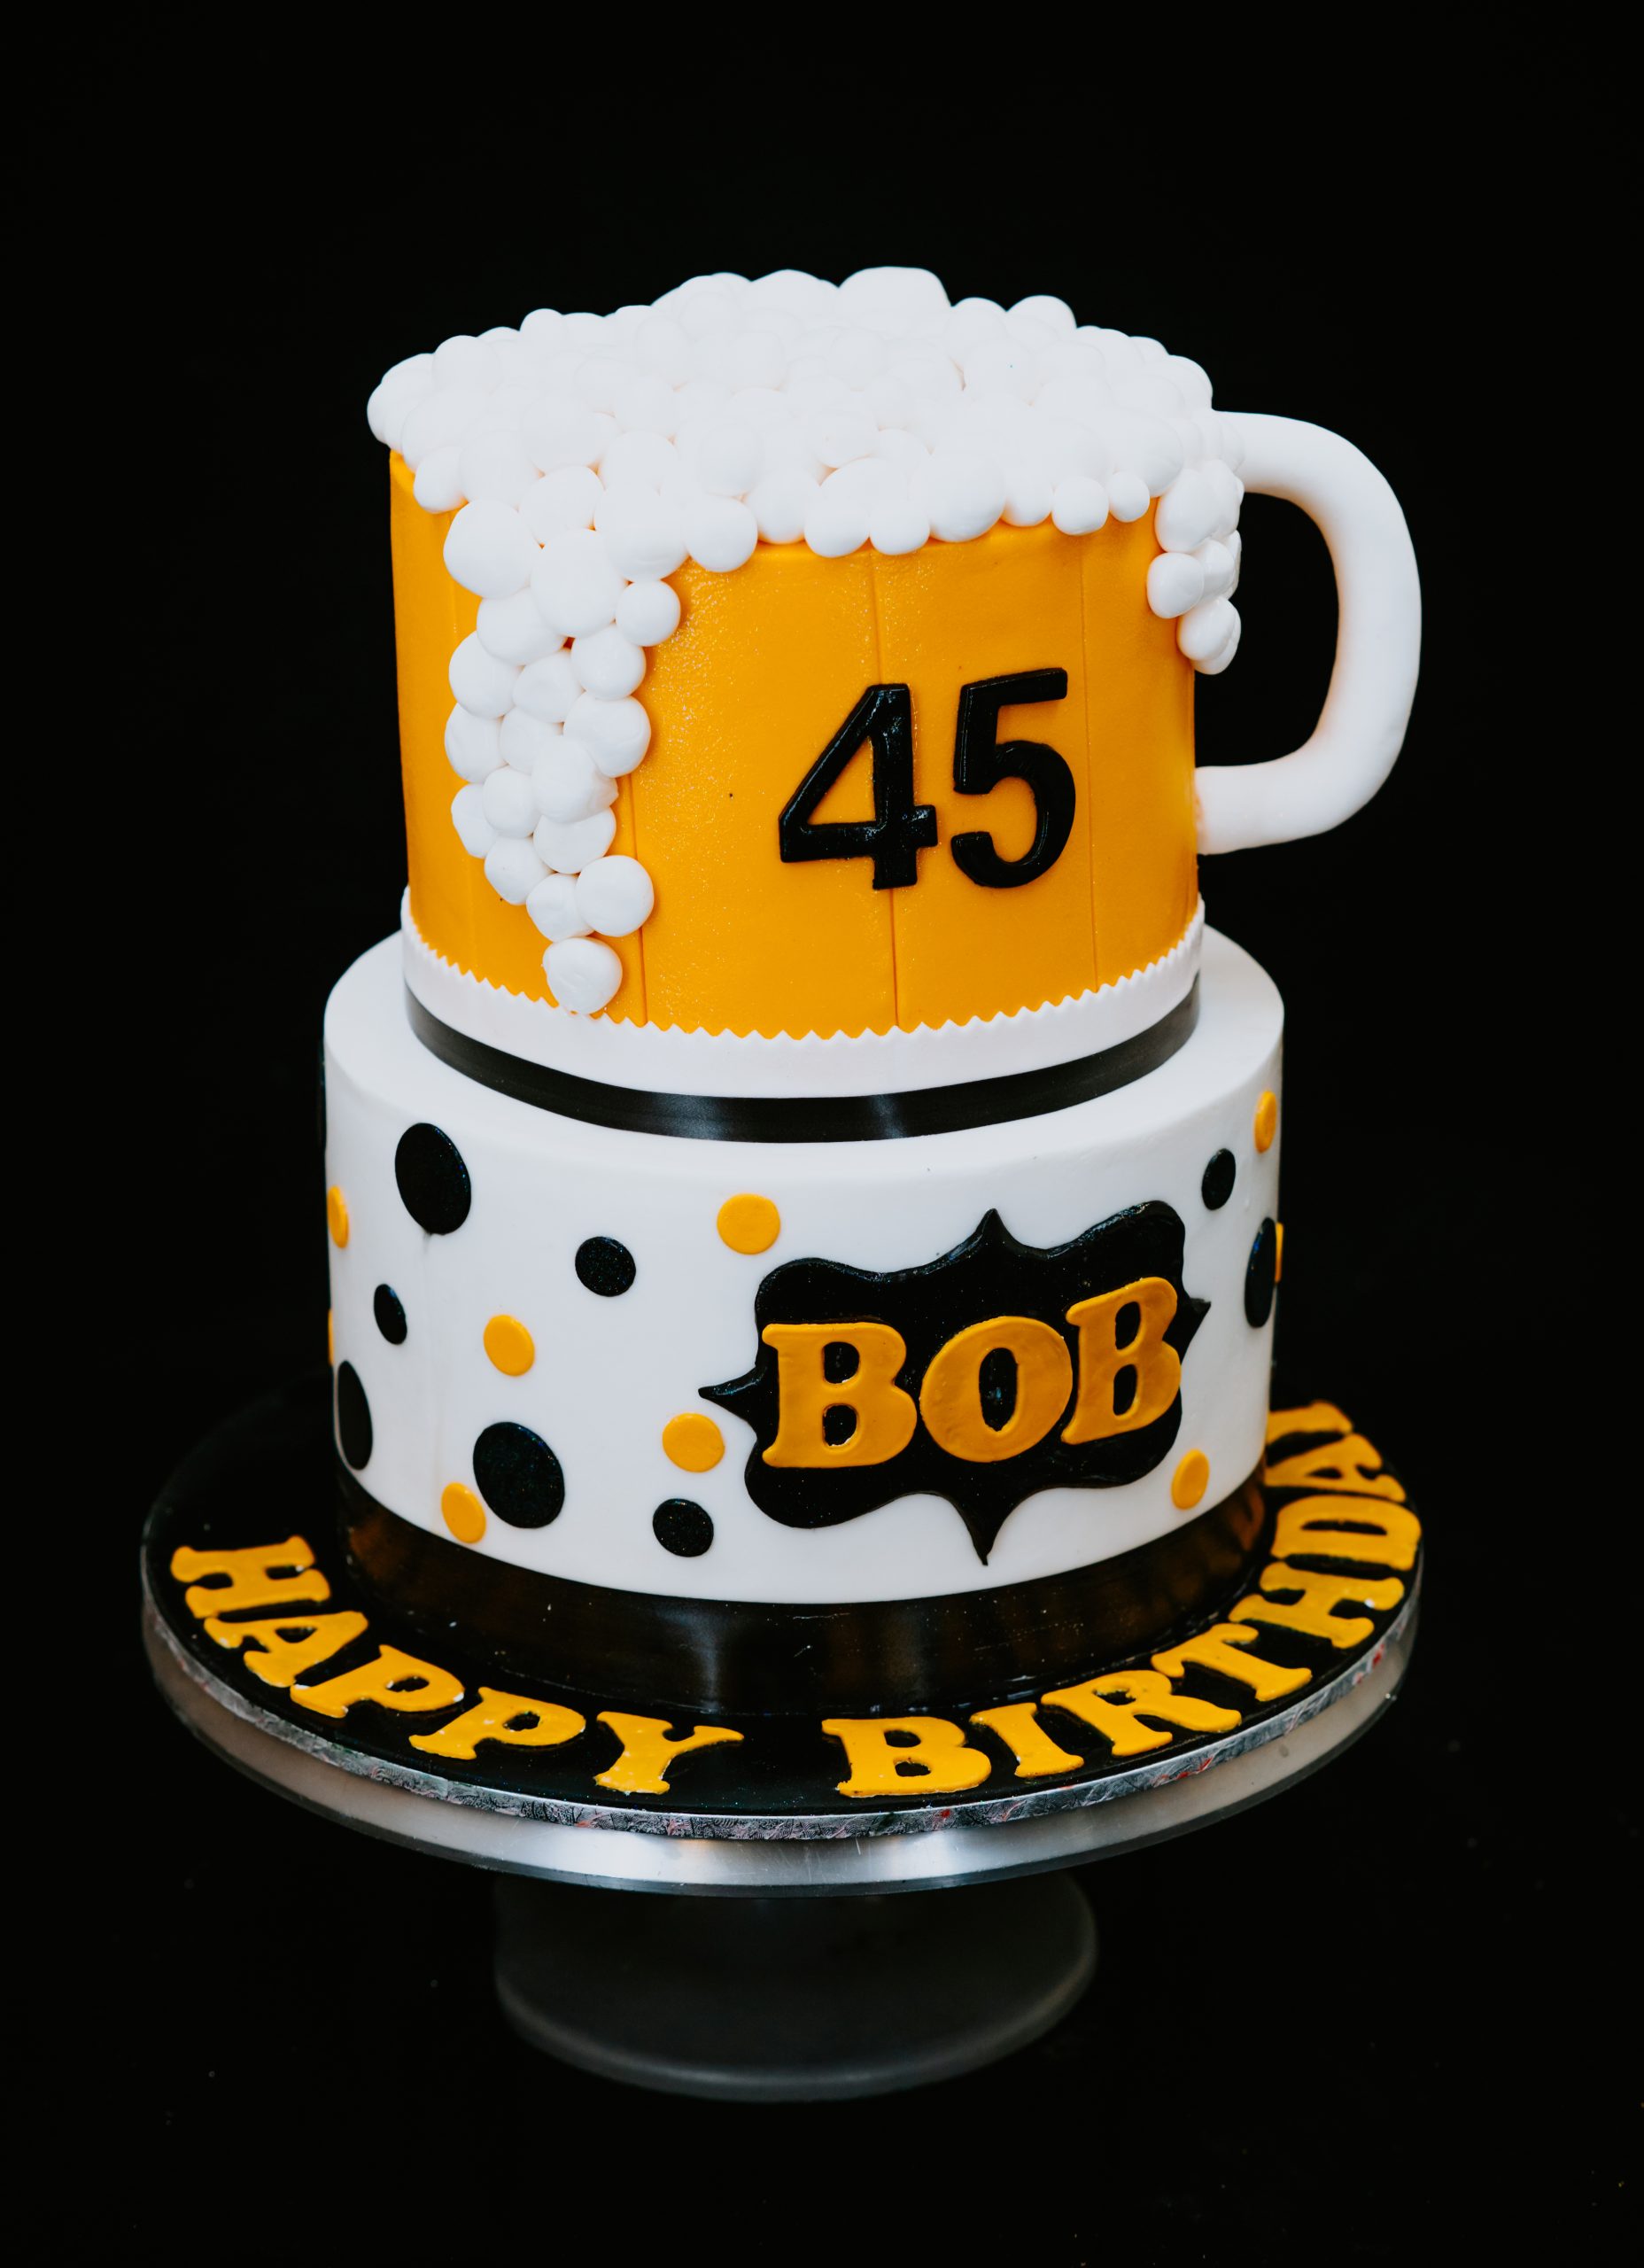 Send a Happy Birthday Beer Cake | Beer Birthday Cake Delivered -  www.GiveThemBeer.com